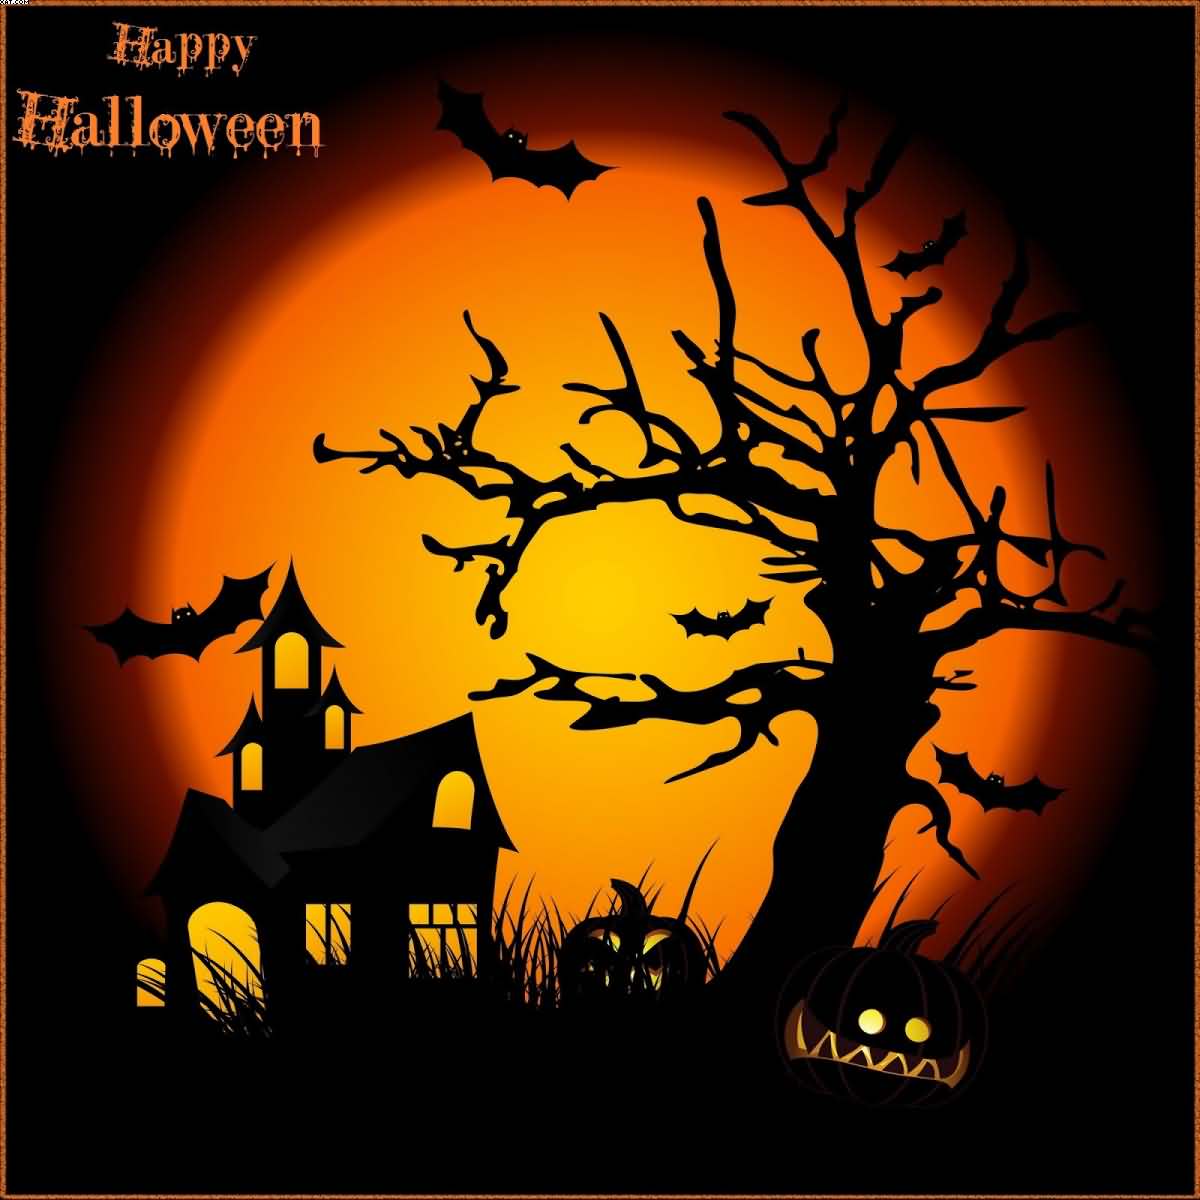 Happy Halloween card with scary pumpkin,rearmouse flying over ghost house picture